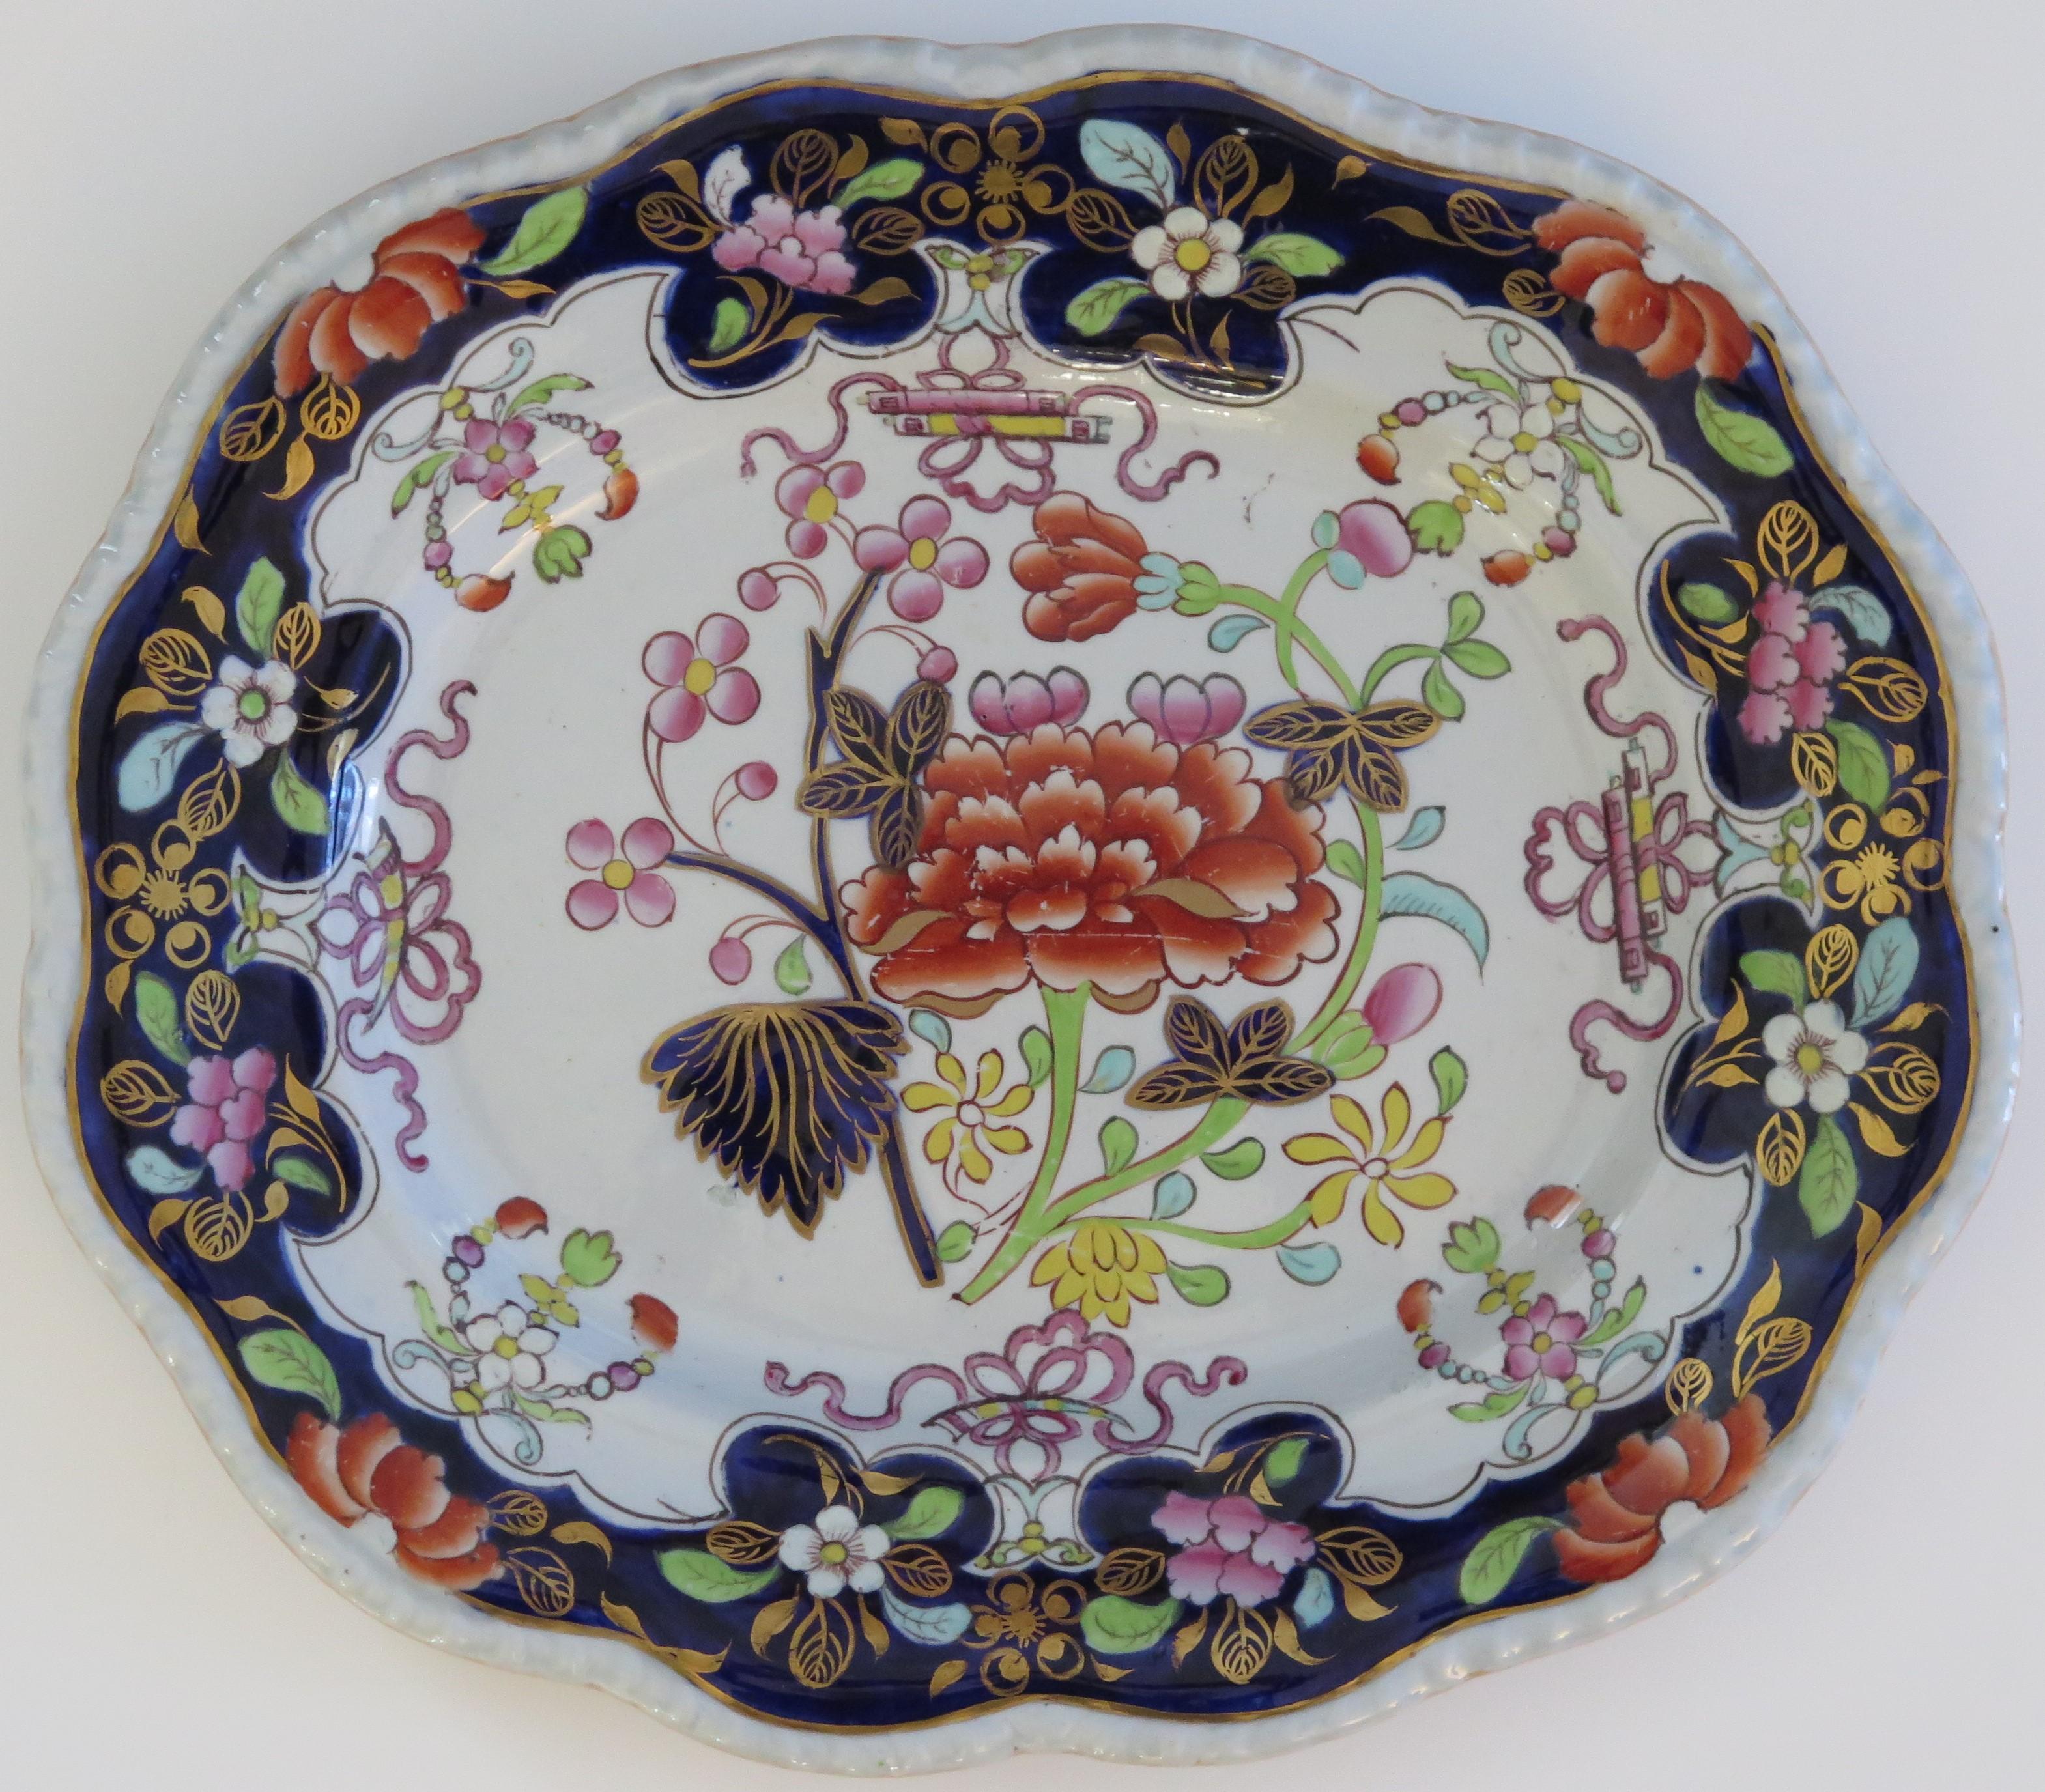 This Ironstone pottery Platter was made by the Mason's factory at Lane Delph, Staffordshire, England and is decorated in the Red Peony & Scrolls pattern, dating to the 19th century, Circa 1835.

This is a rare pattern.

The design is one of